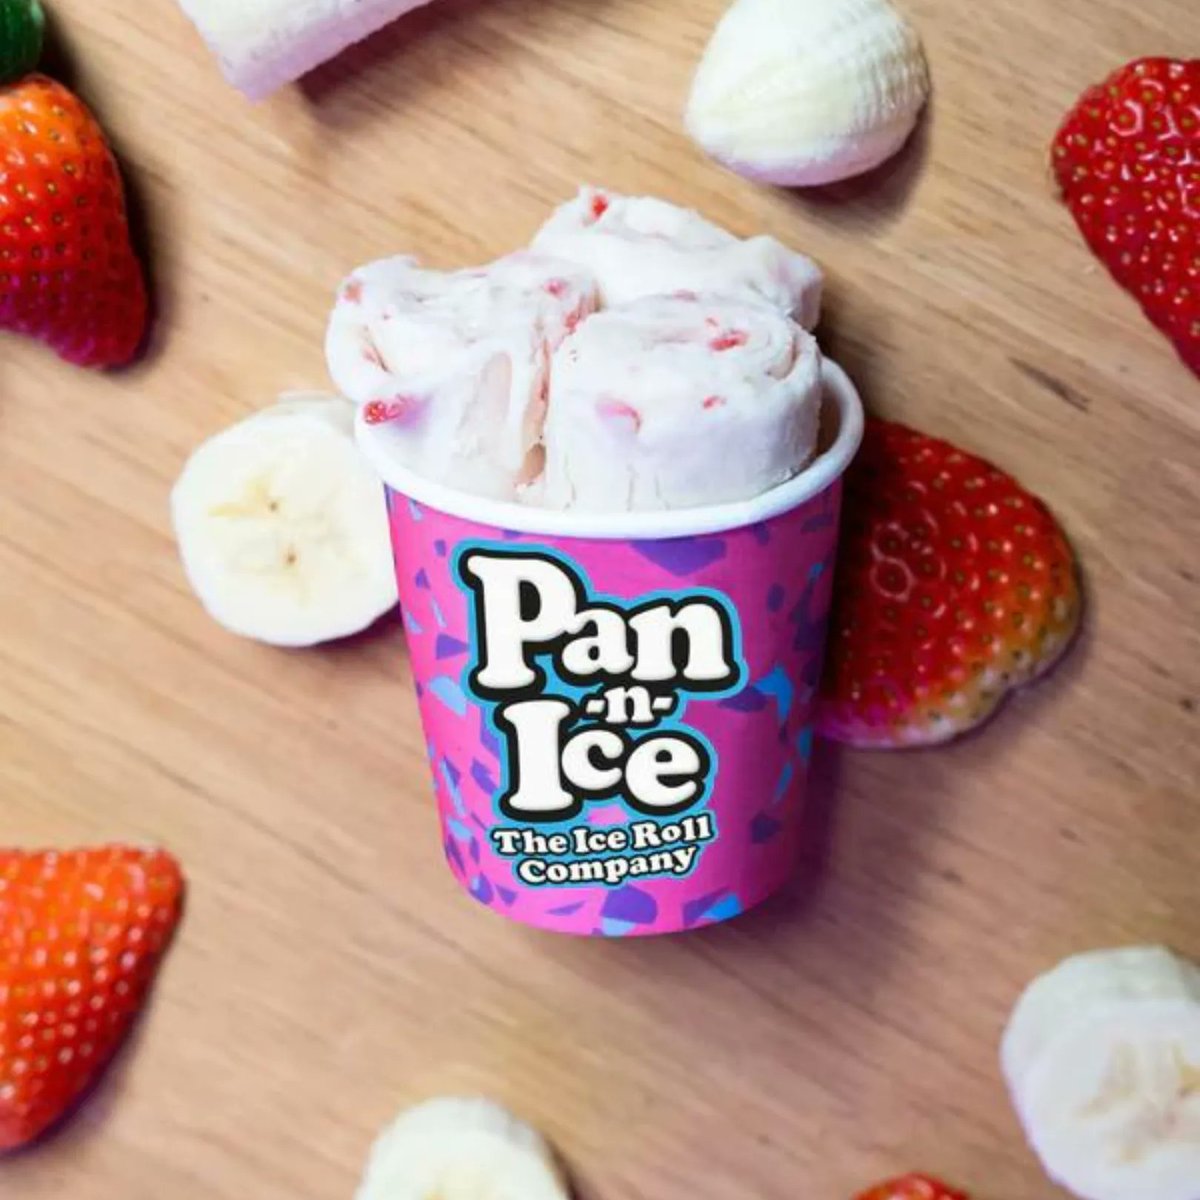 We know that summer isn't summer without Ice Cream! We are very excited to announce that @pan_n_ice will be onboard with us at our upcoming Show! You can try their delicious ice cream rolls and discuss hiring them at your next summer event #LSES